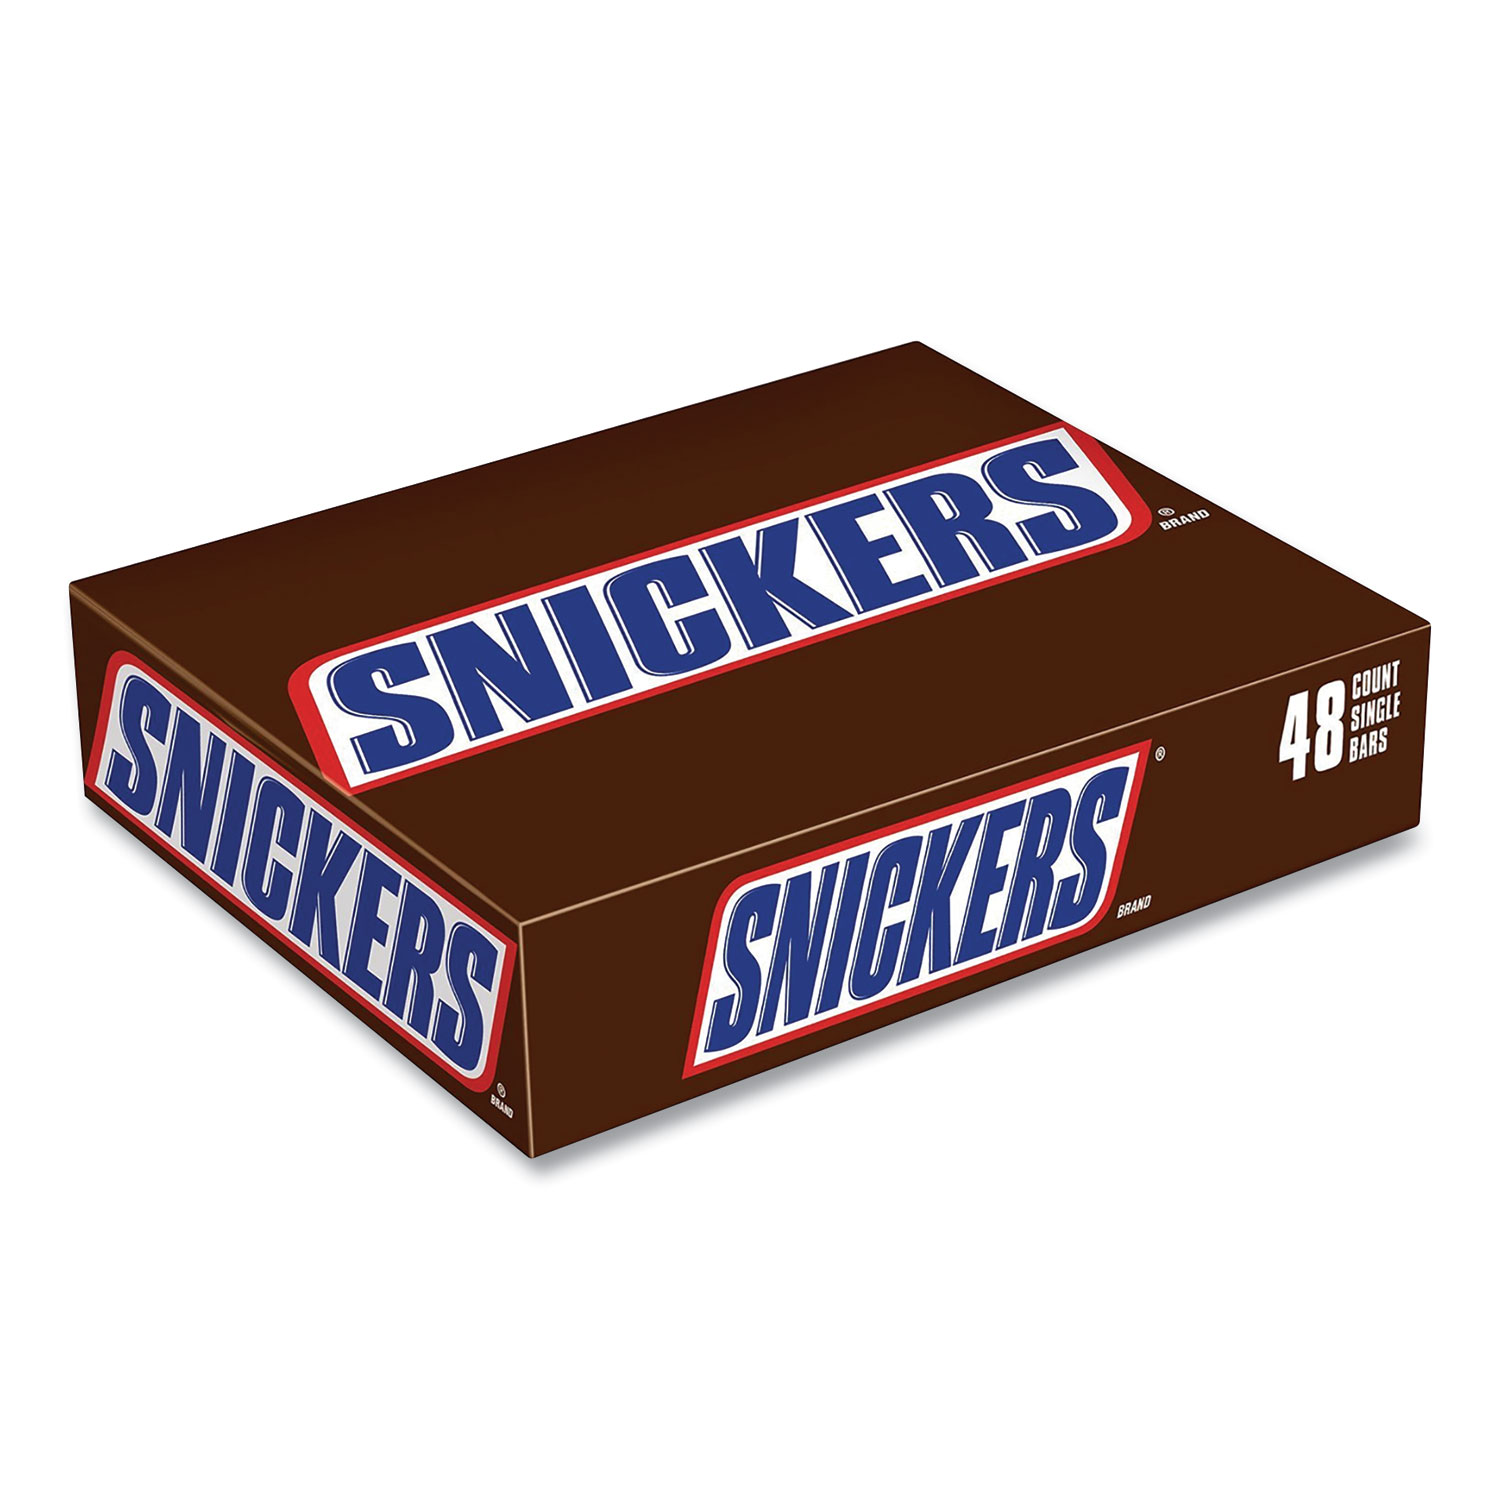  Snickers 551412 Original Candy Bar, Full Size, 1.86 oz Bar, 48 Bars/Box, Free Delivery in 1-4 Business Days (GRR20901318) 